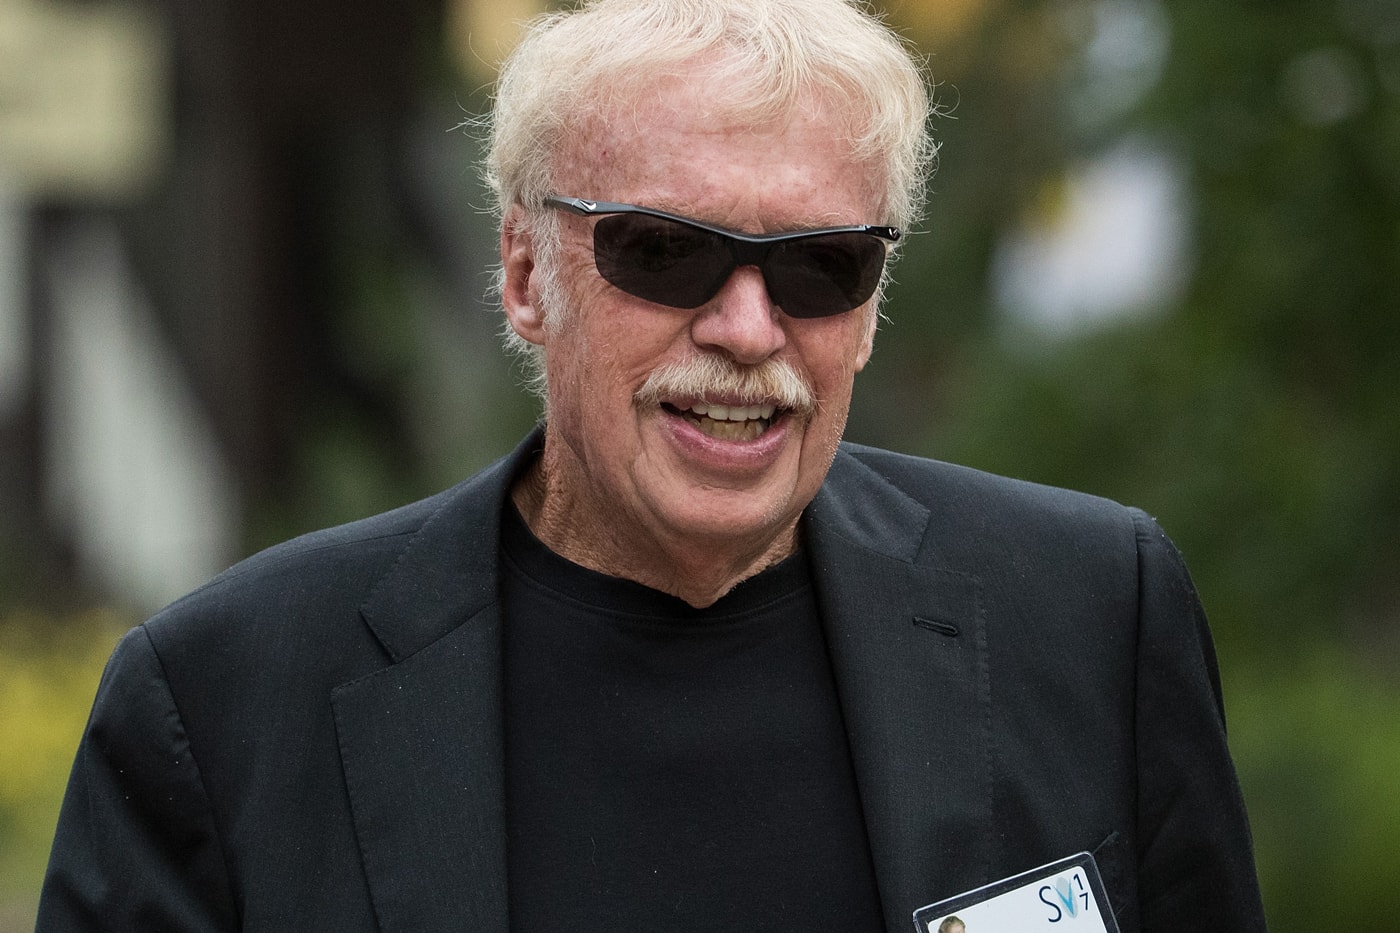 Nike Co-Founder Phil Knight and Wife To Pledge $400 Million USD To Support Portland's Black Community philanthropy 1803 fund swoosh 